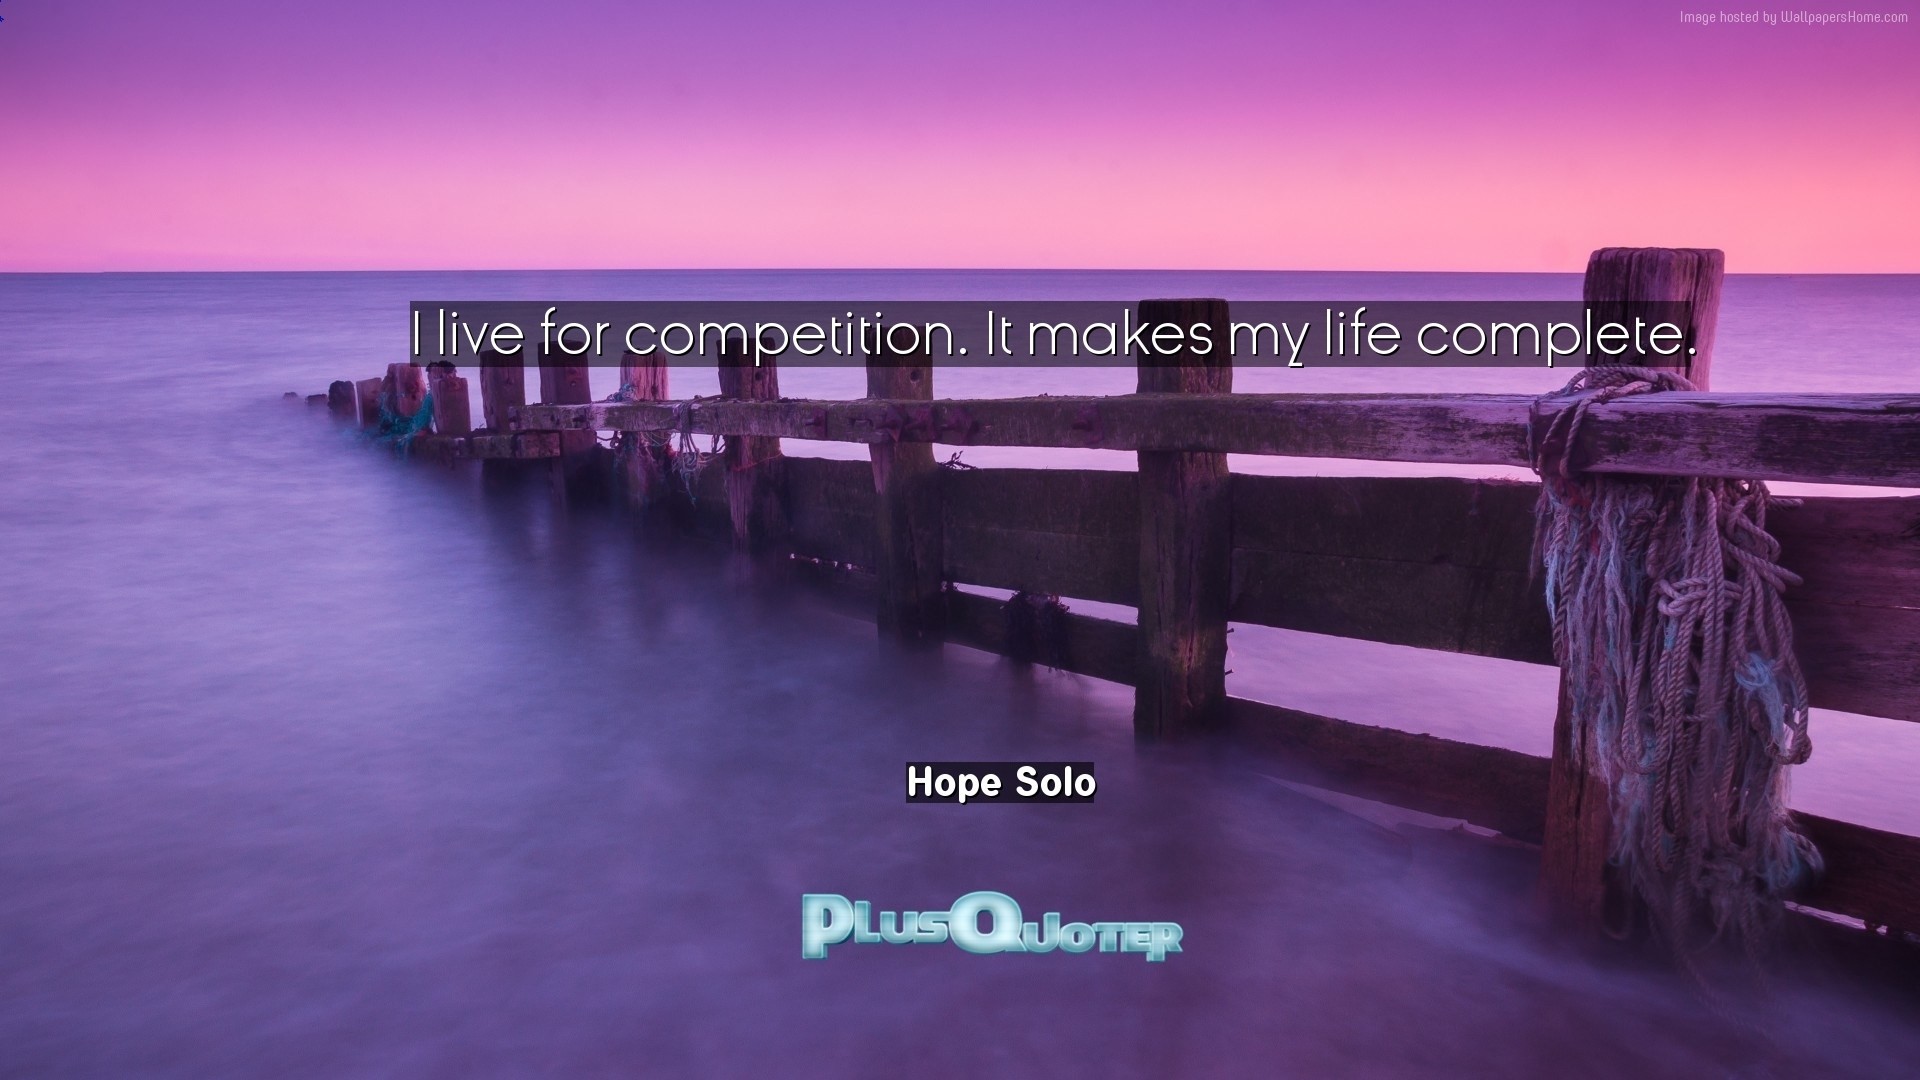 1920x1080 Download Wallpaper with inspirational Quotes- "I live for competition. It  makes my life